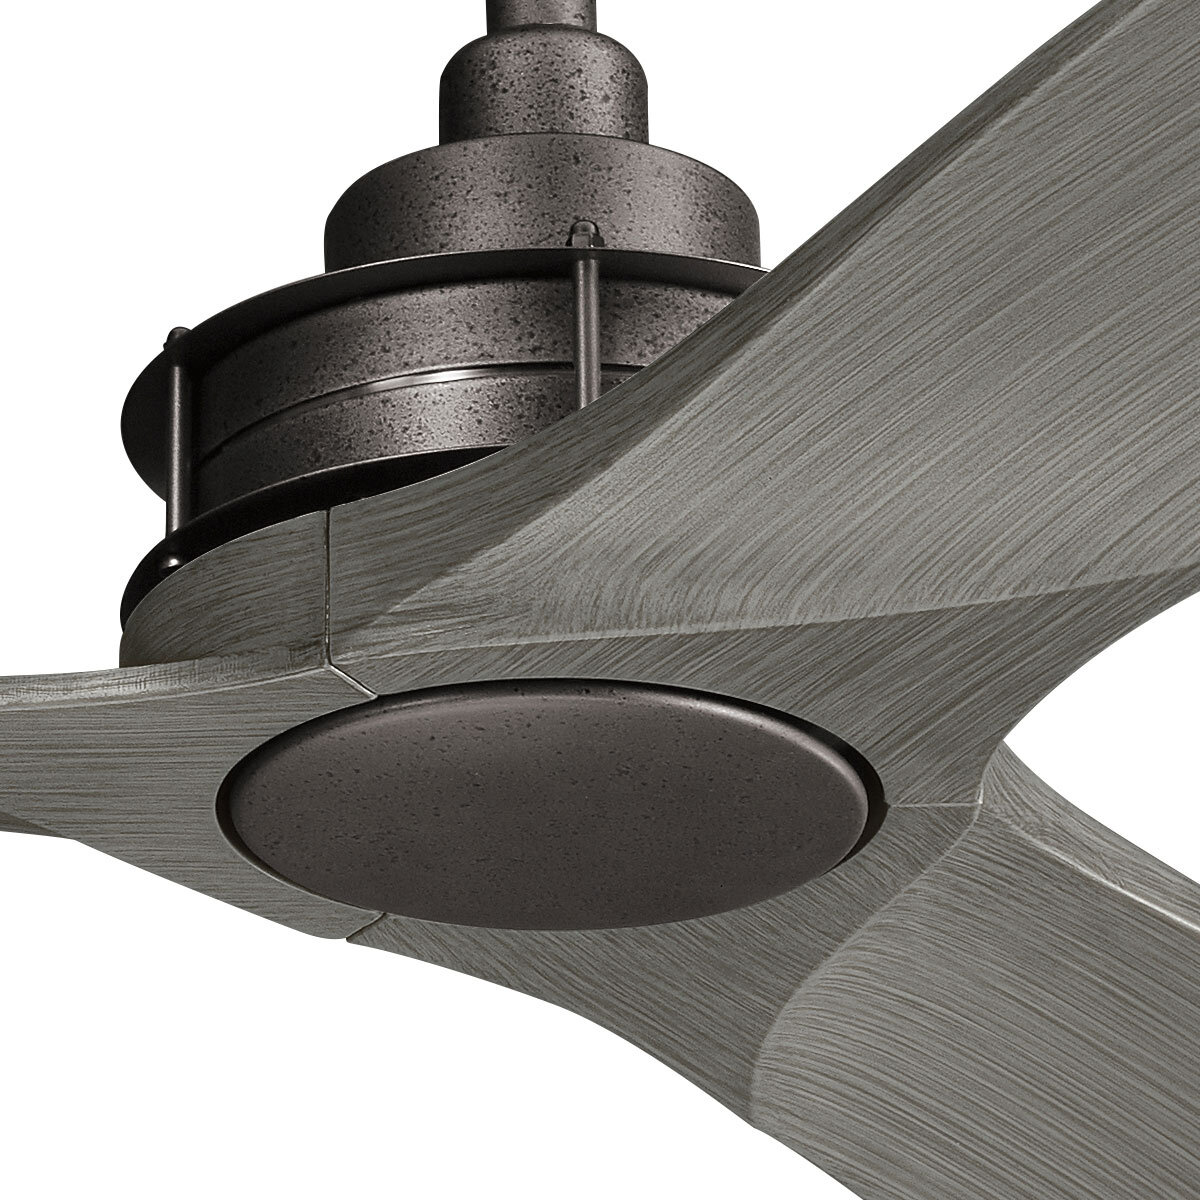 Ried 142cm indoor fan in Anvil Iron black finish with Driftwood Grey blades